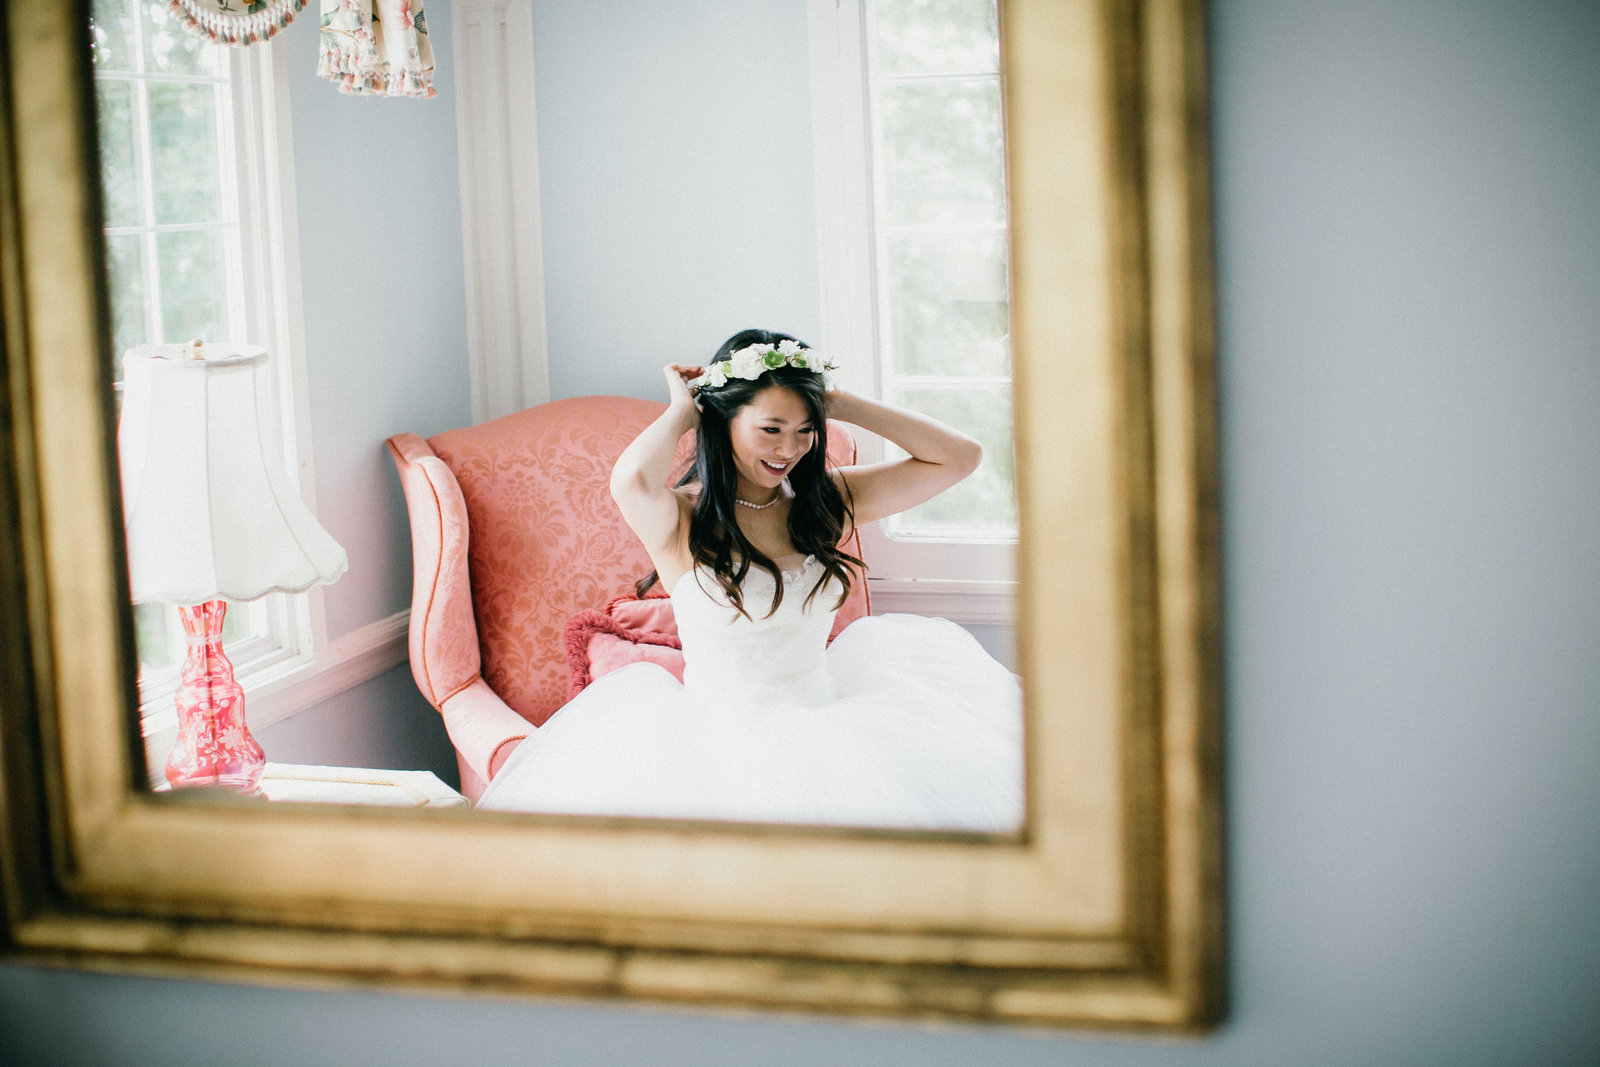 Bride getting ready at this traditional 18th century house located in New Jersey.